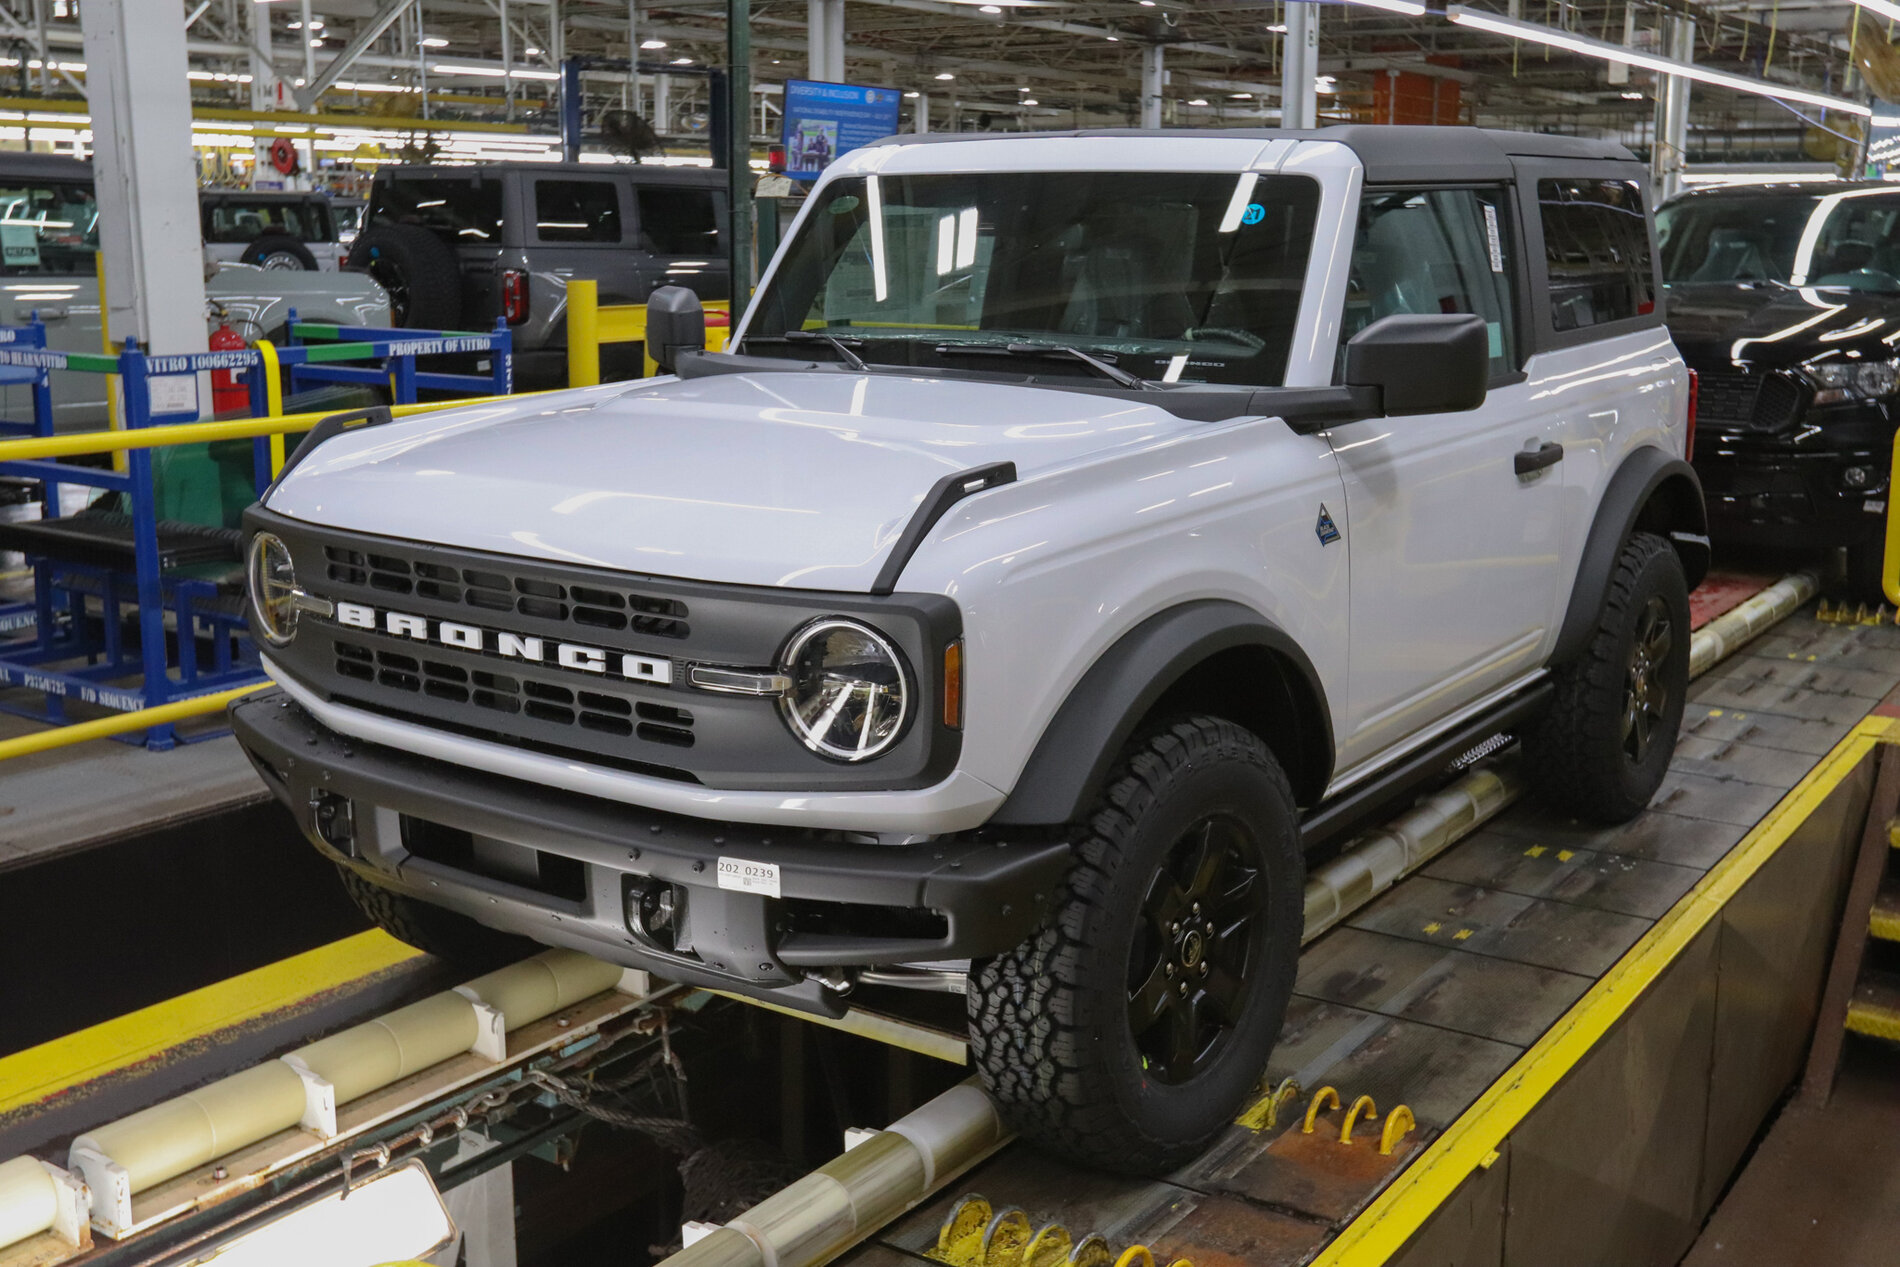 Ford Bronco Post Your Bronco Production Line Pics! (From Ford Emails Starting Today) image_207535208169997